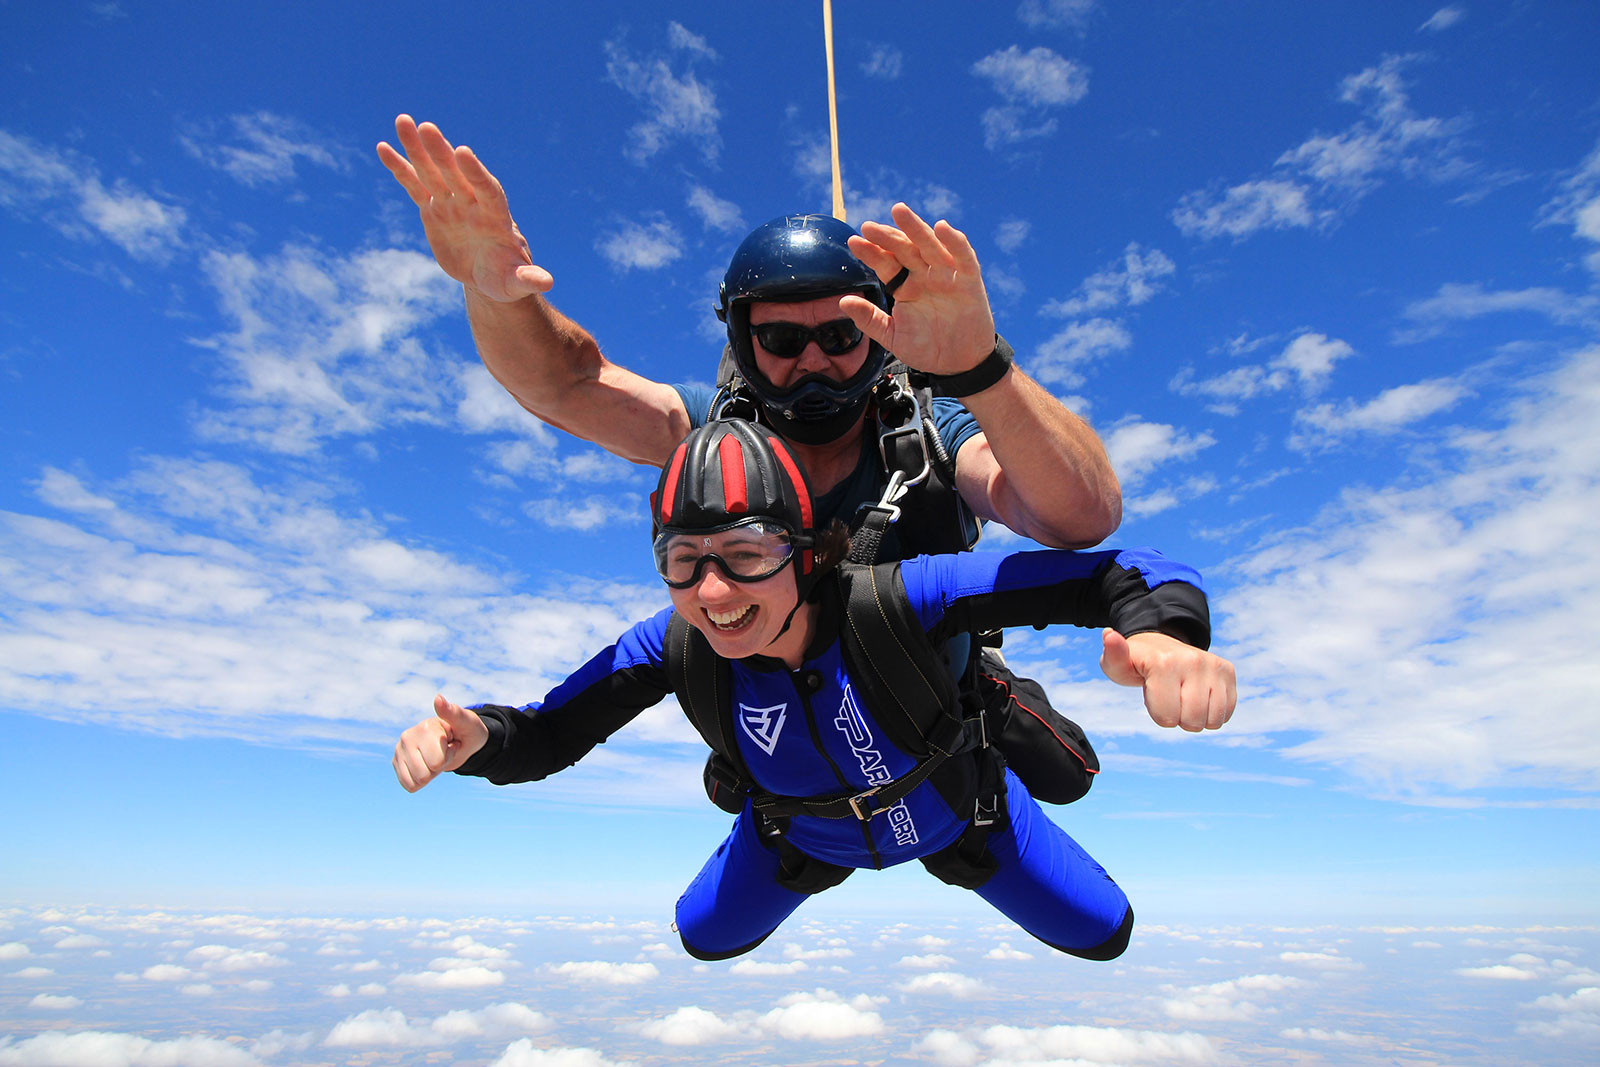 We skydived for Alzheimer’s Society charity